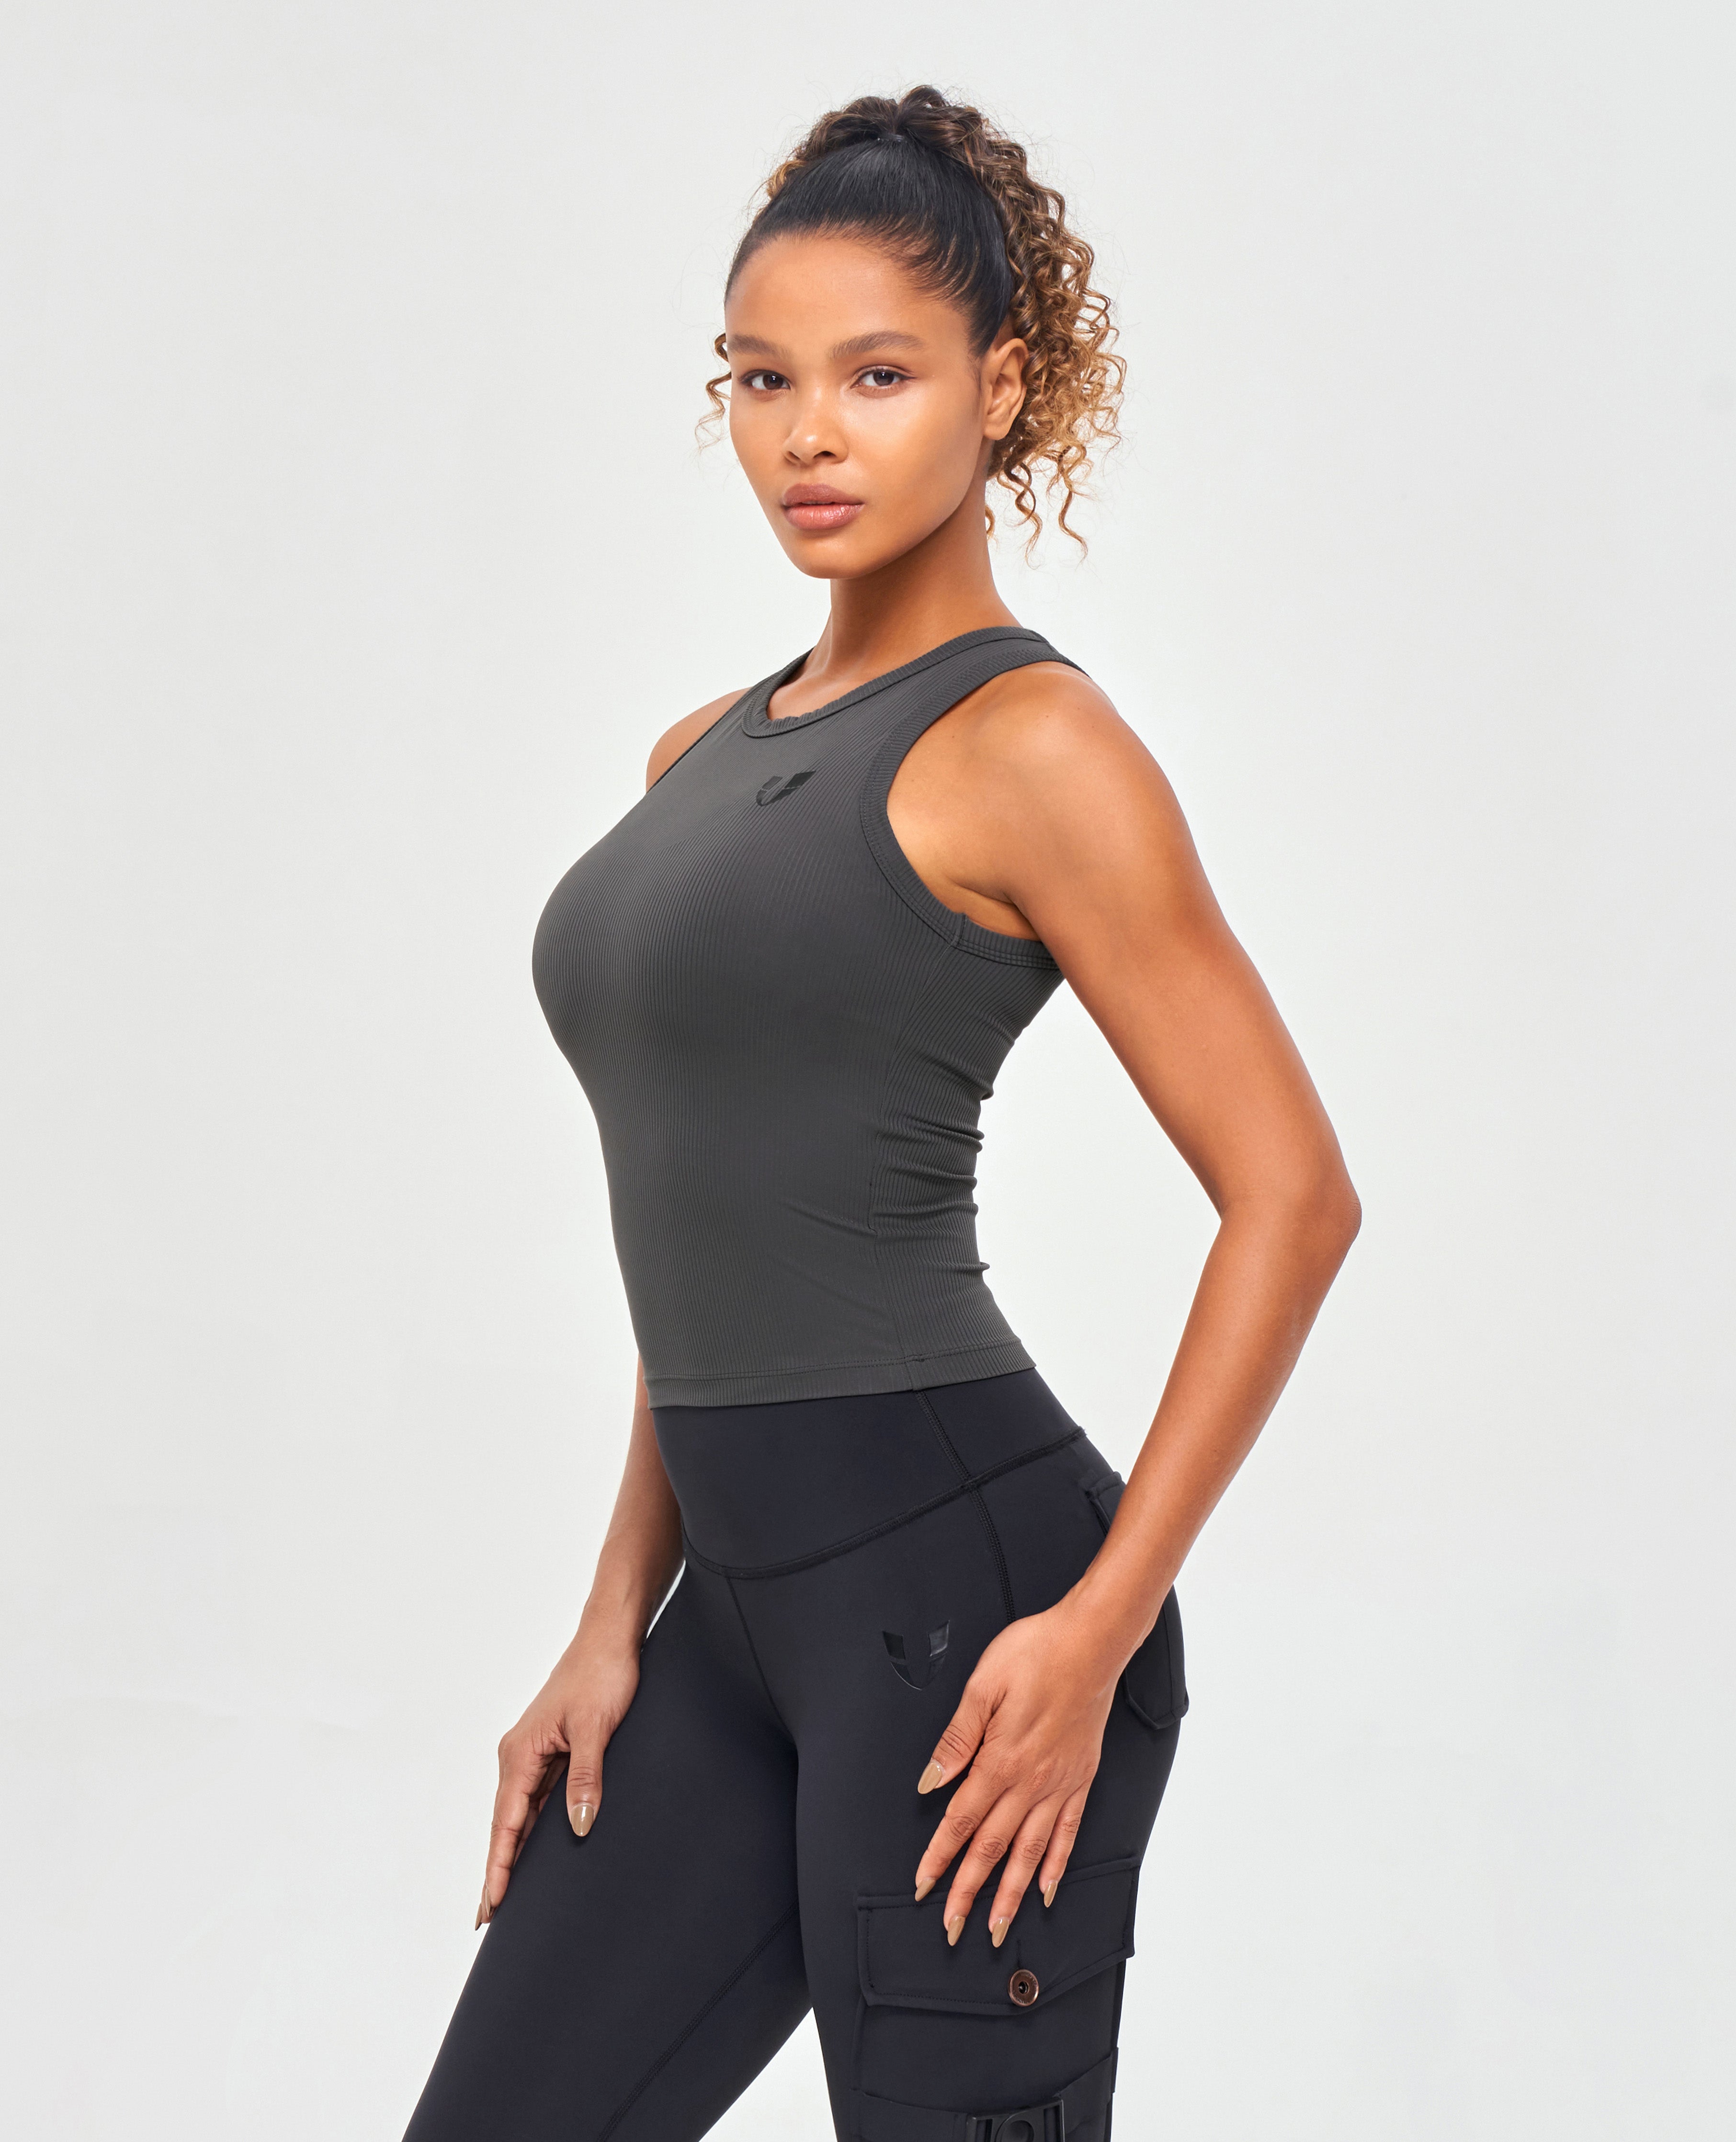 Yoga, Gym & Workout Tank Tops for Women